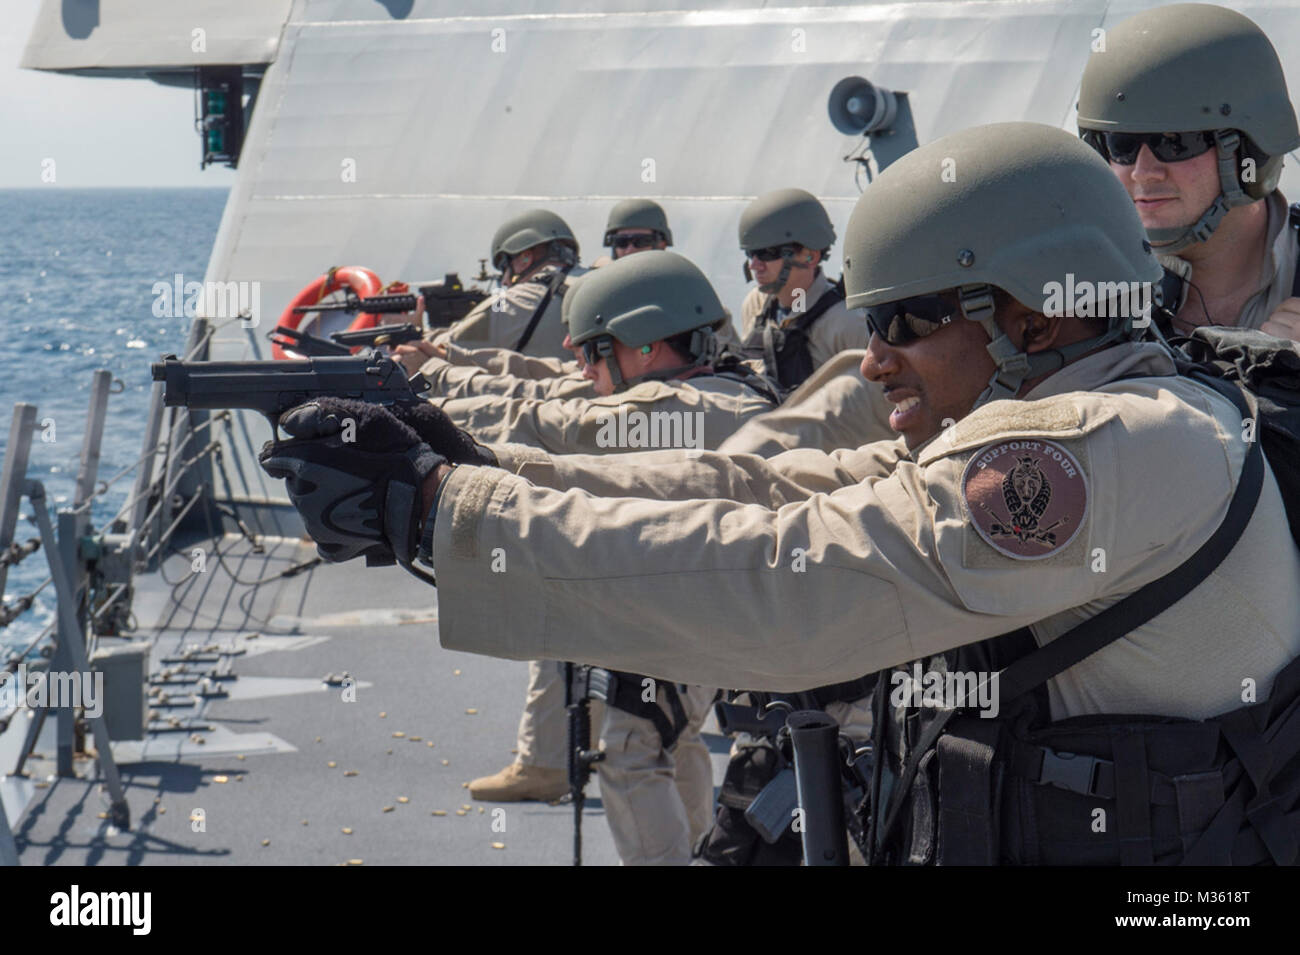 150801-N-MK881-245 SOUTH CHINA SEA (August 1, 2015) Sailors assigned to Surface Warfare Mission Package, Detachment 4, currently embarked aboard the littoral combat ship USS Fort Worth (LCS 3) participate in a live fire exercise on the ship’s forecastle. Currently on a 16-month rotational deployment in support of the Indo-Asia-Pacific Rebalance, Fort Worth is a fast and agile warship tailor-made to patrol the region’s littorals and work hull-to-hull with partner navies, providing 7th Fleet with the flexible capabilities it needs now and in the future. (U.S. Navy photo by Mass Communication Spe Stock Photo